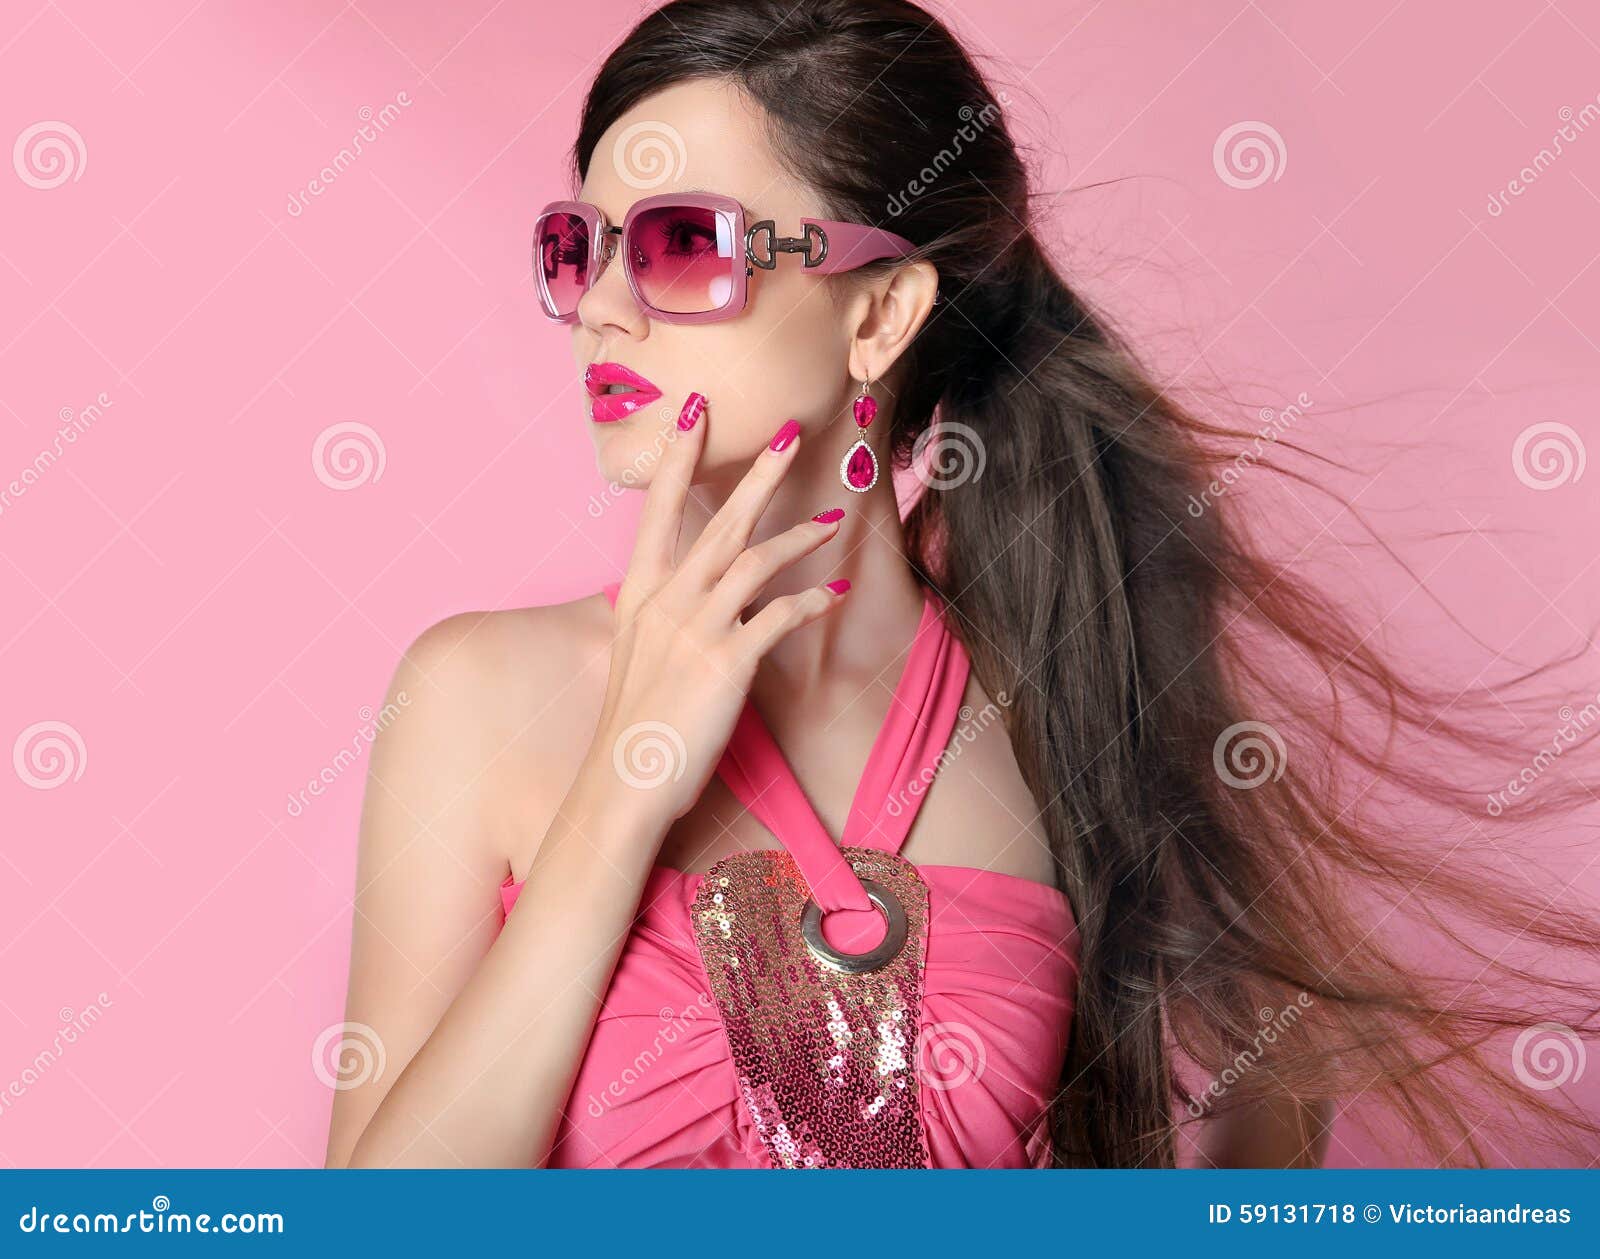 beauty fashion model girl in sunglasses with bright makeup, long